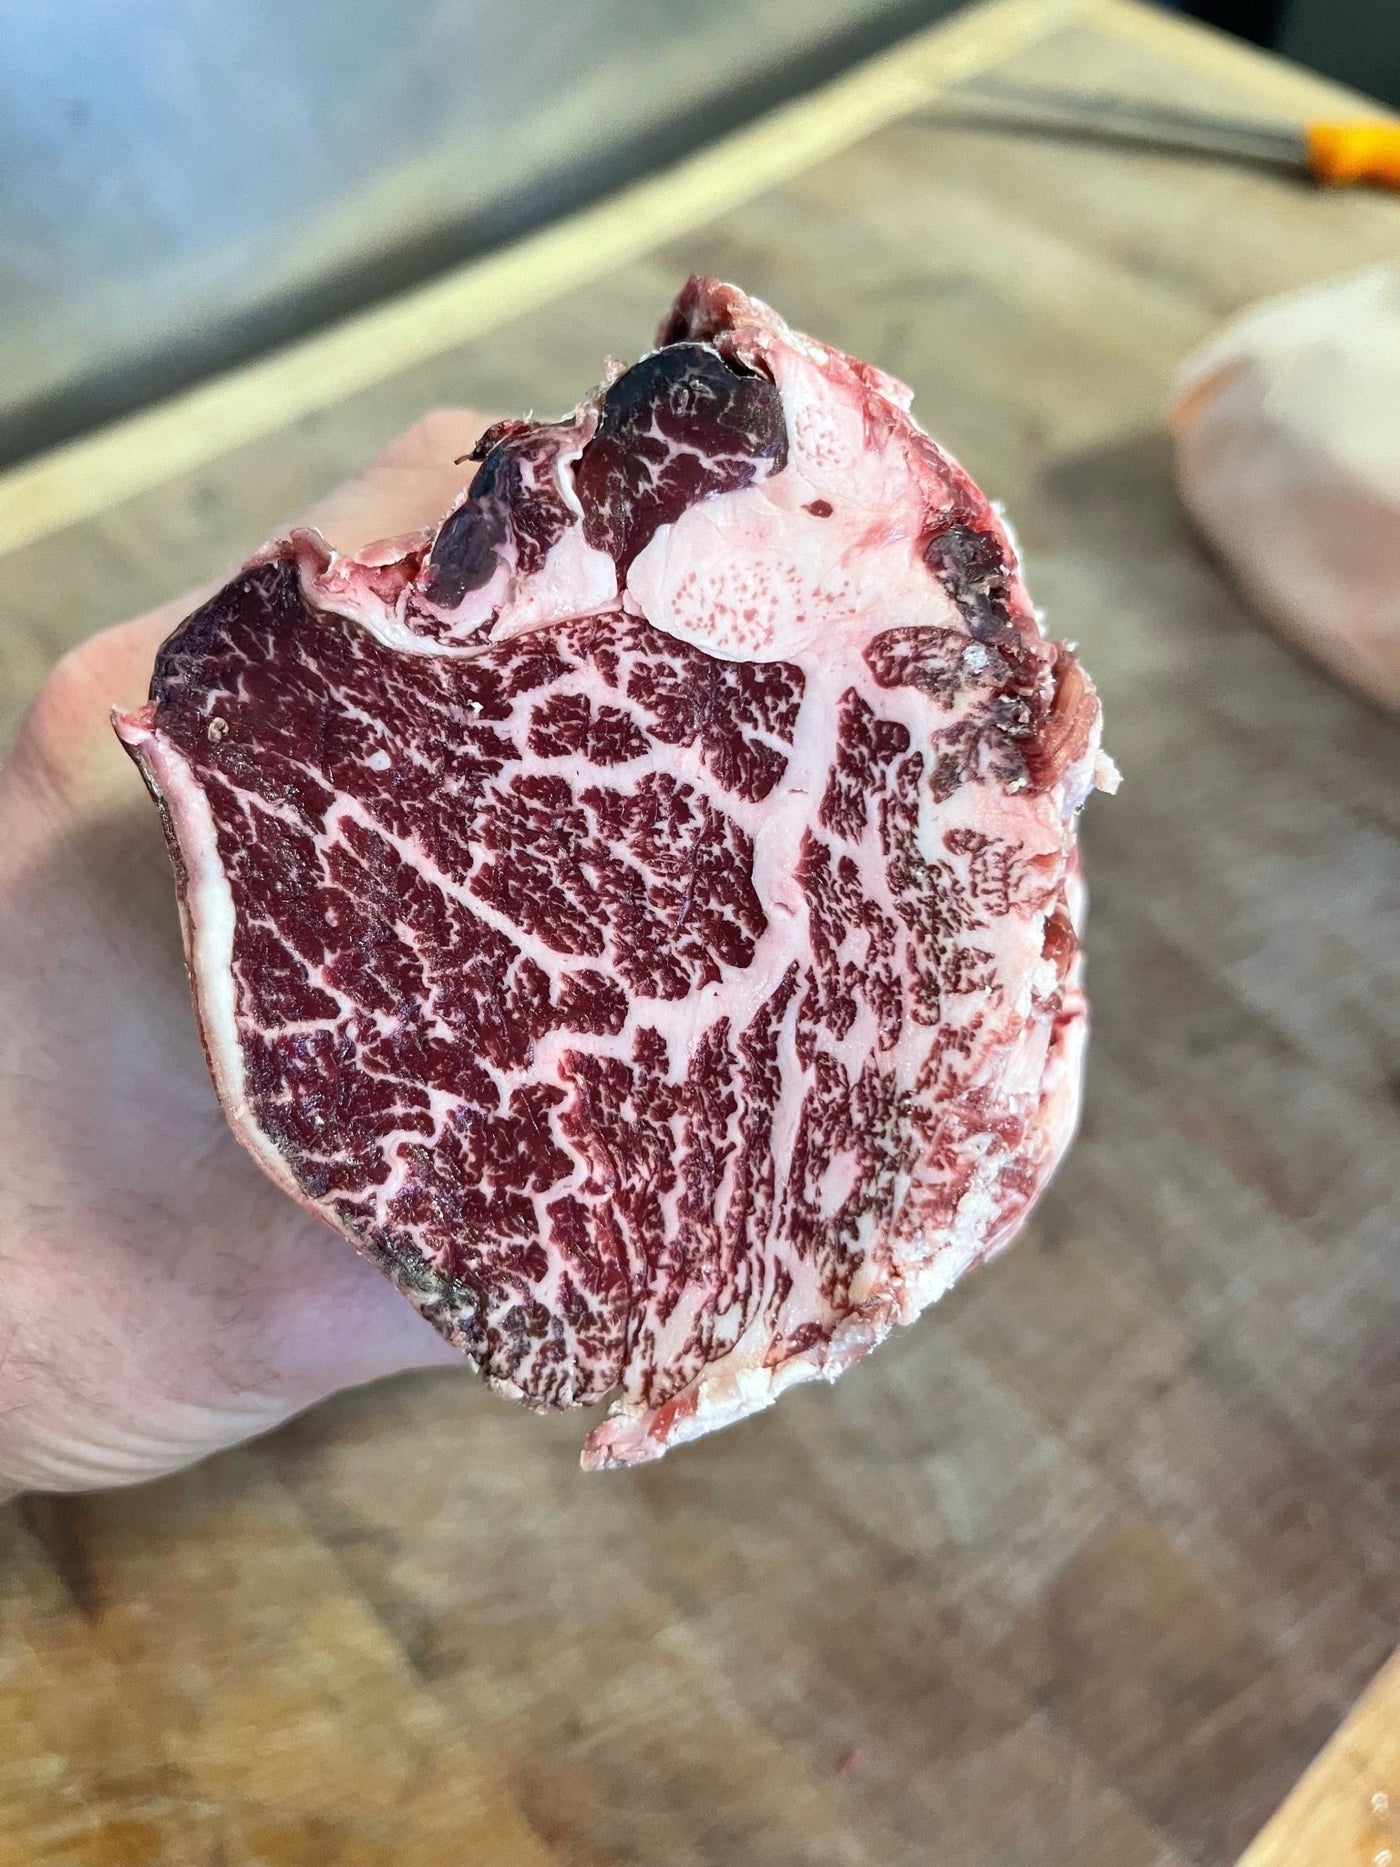 35 Day Dry-Aged German Ex Dairy Holstein Fillet - Thomas Joseph Butchery - Ethical Dry-Aged Meat The Best Steak UK Thomas Joseph Butchery